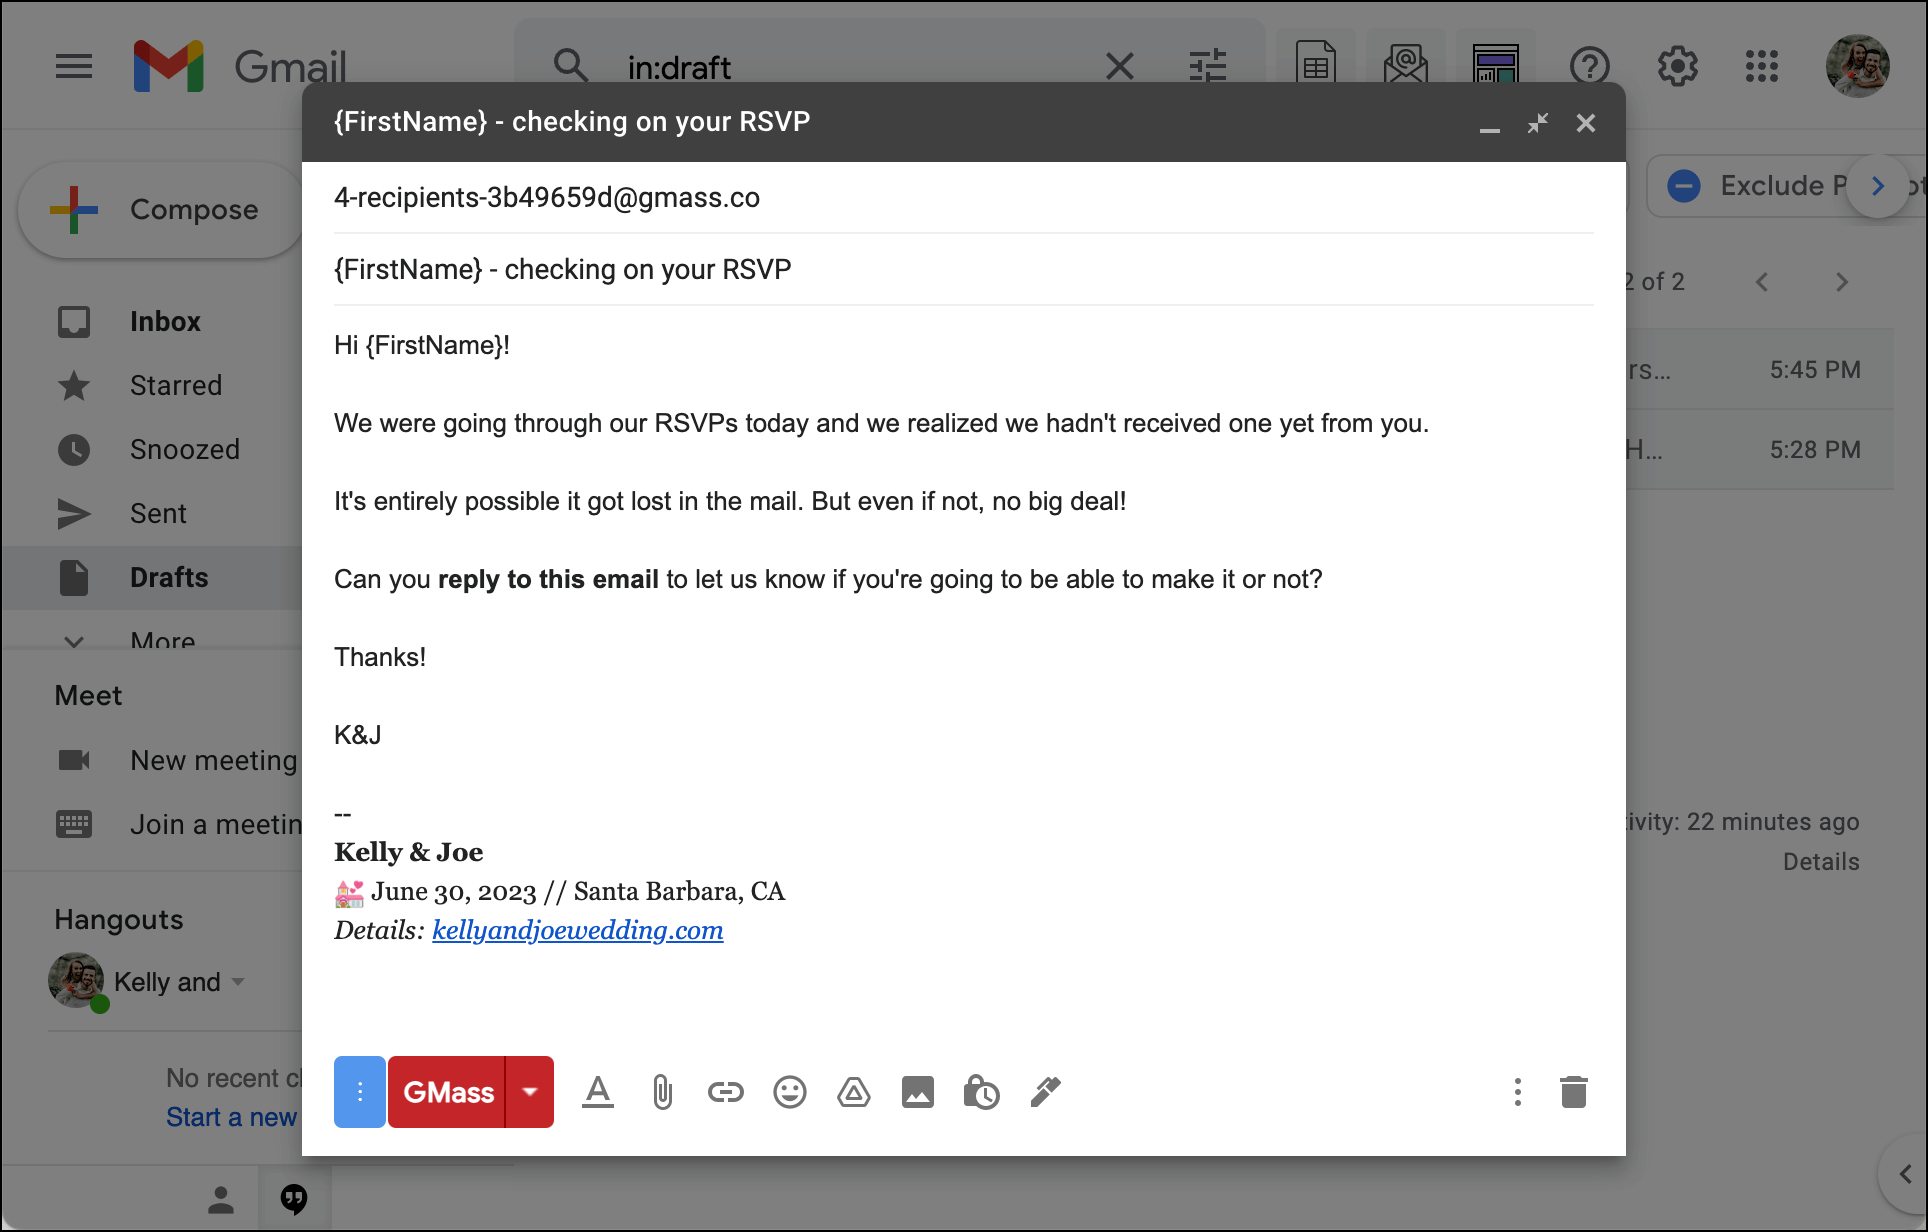 A polite but firm RSVP check email